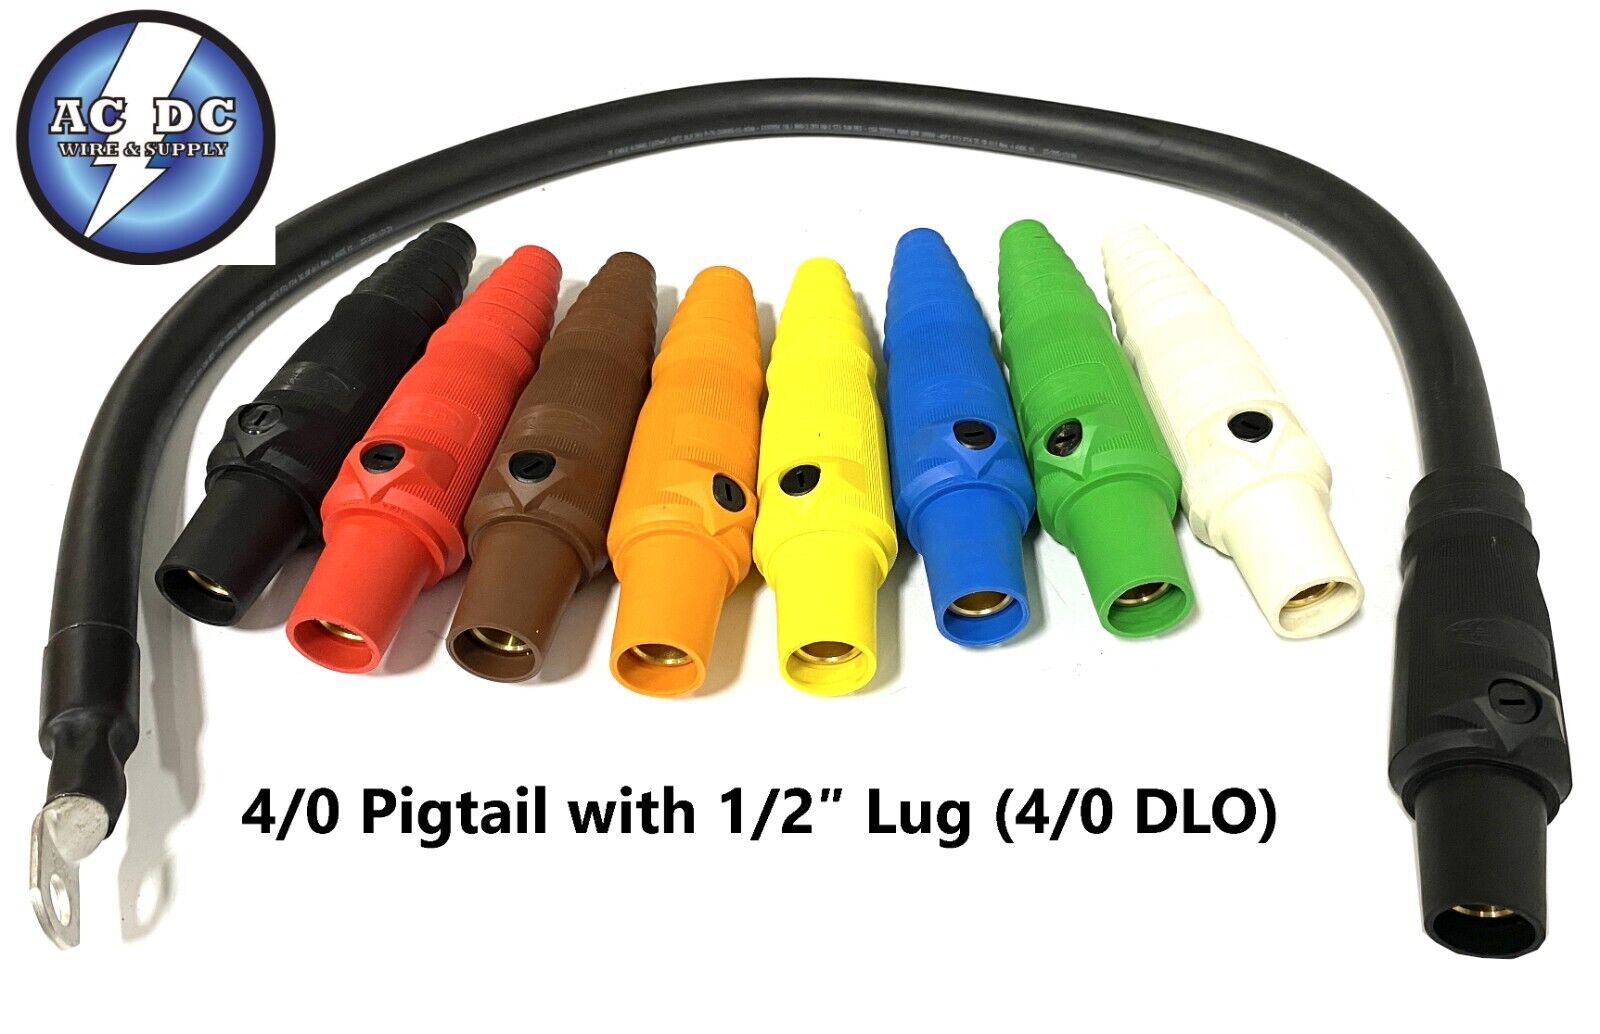 4/0 Pigtail with 1/2″ Lug (4/0 DLO CABLE 2000V GENERATOR PIGTAIL)